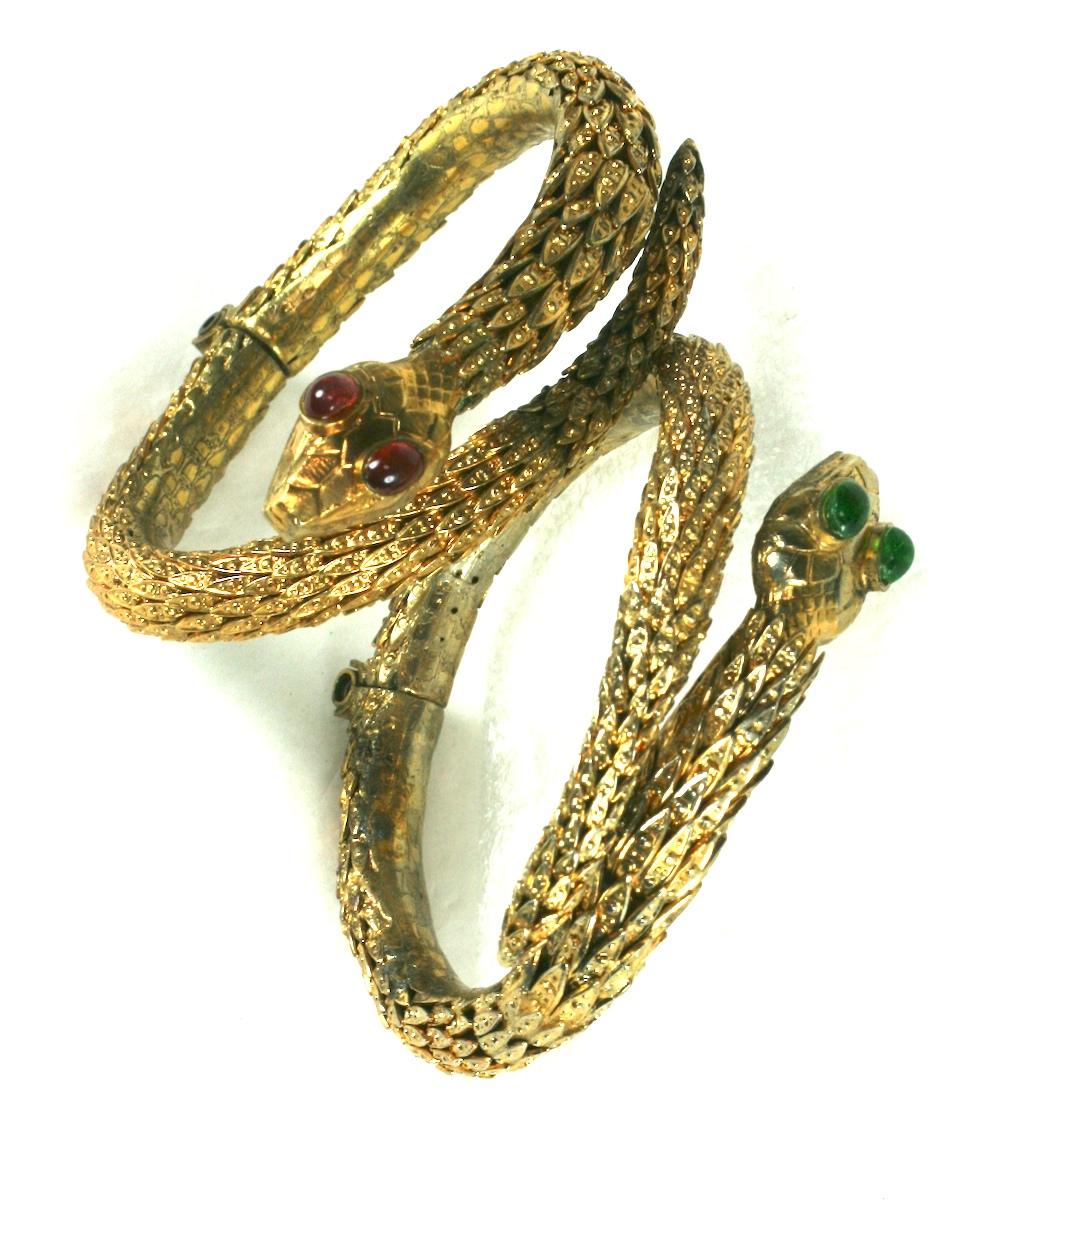 Rare Pair of Period Haute Couture Chanel Snake Bangles by Maison Goossens. These hand made hinged bracelets are composed of dozens of graduated gilt filigree caps soldered together to form the body of each bracelet. Each snake head is hand made with